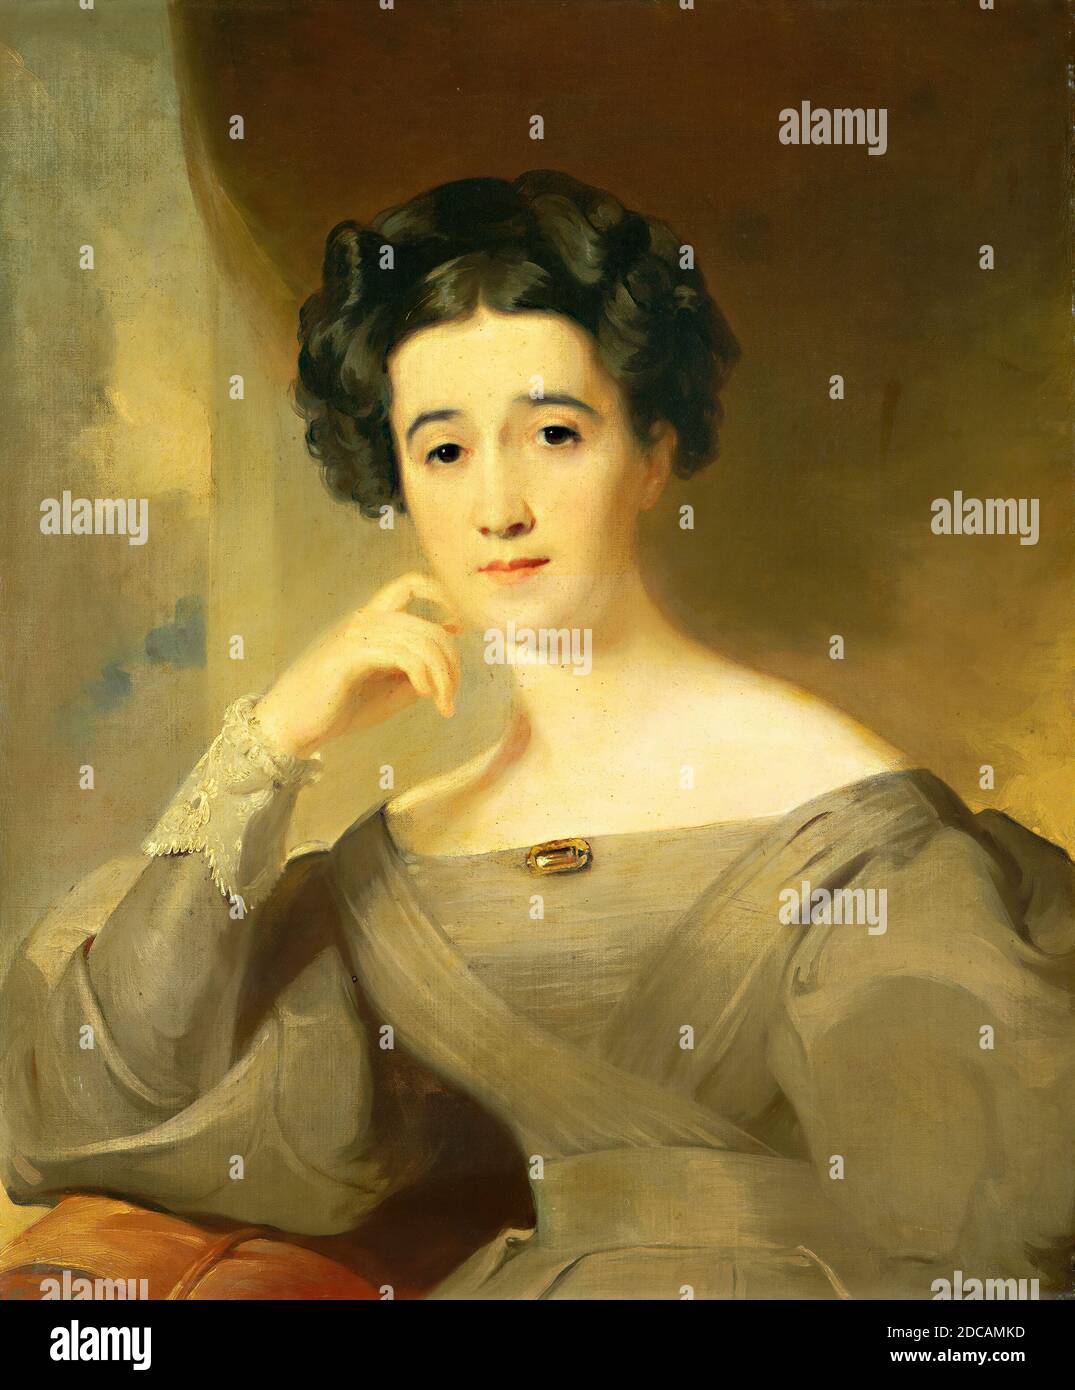 Thomas Sully, (artist), American, born England, 1783 - 1872, Mrs. William Griffin, 1830, oil on canvas, overall: 76.3 x 63.8 cm (30 1/16 x 25 1/8 in.), framed: 94.3 x 81.6 cm (37 1/8 x 32 1/8 in Stock Photo